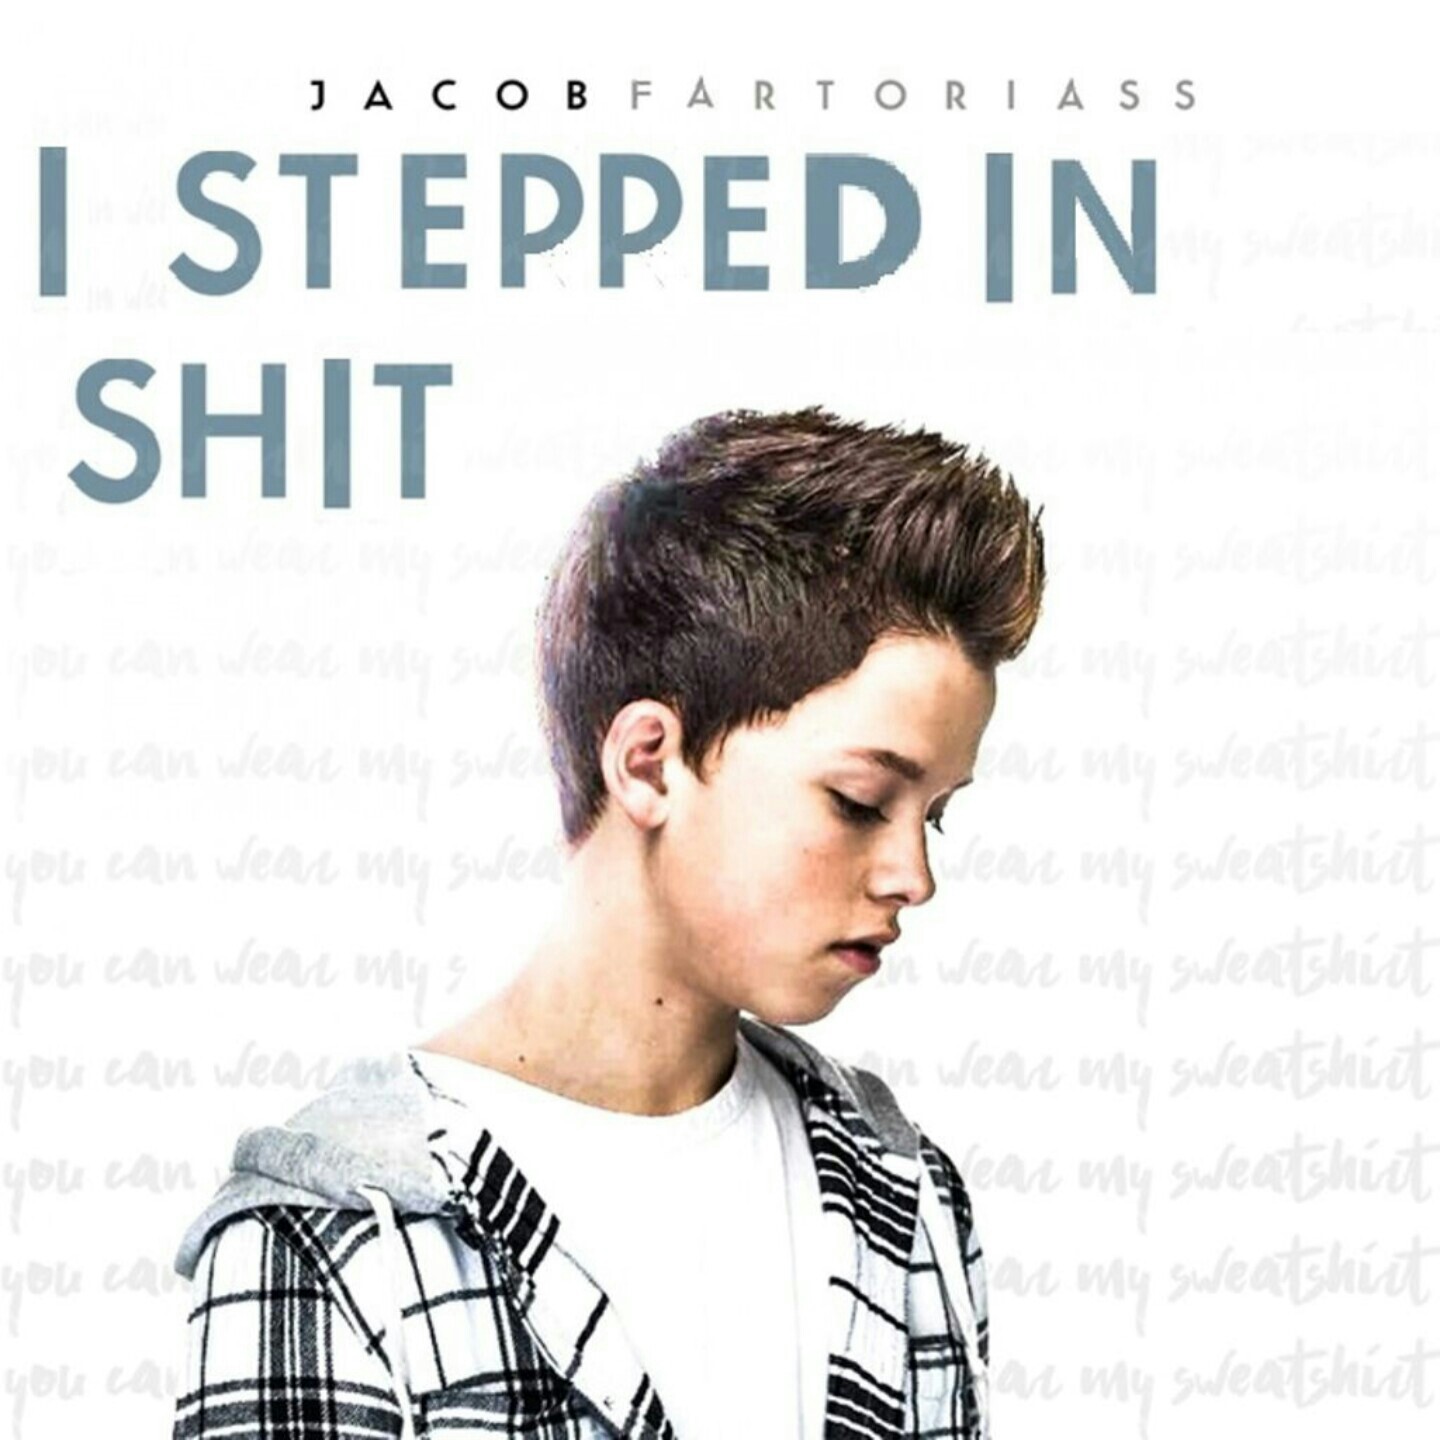 I love this a lot, and it's perfect because I know someone here who loves Jacob (who's absolute garbage btw, his music is awful)